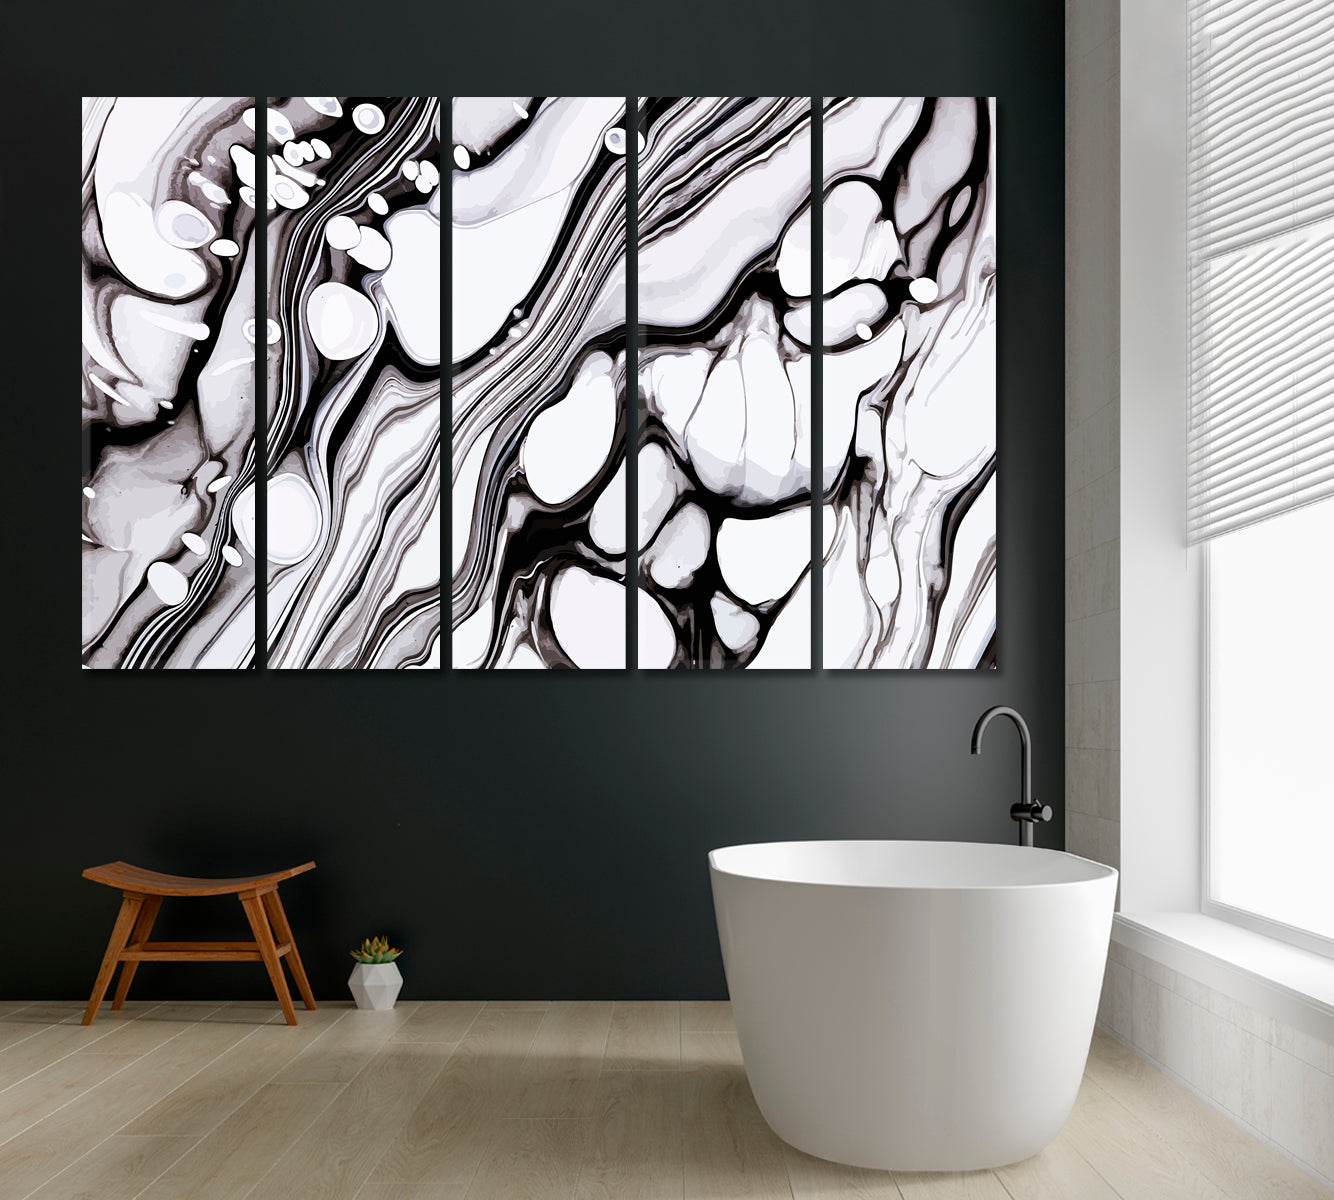 Abstract Black & White Fluid Marble Waves Canvas Print ArtLexy 5 Panels 36"x24" inches 